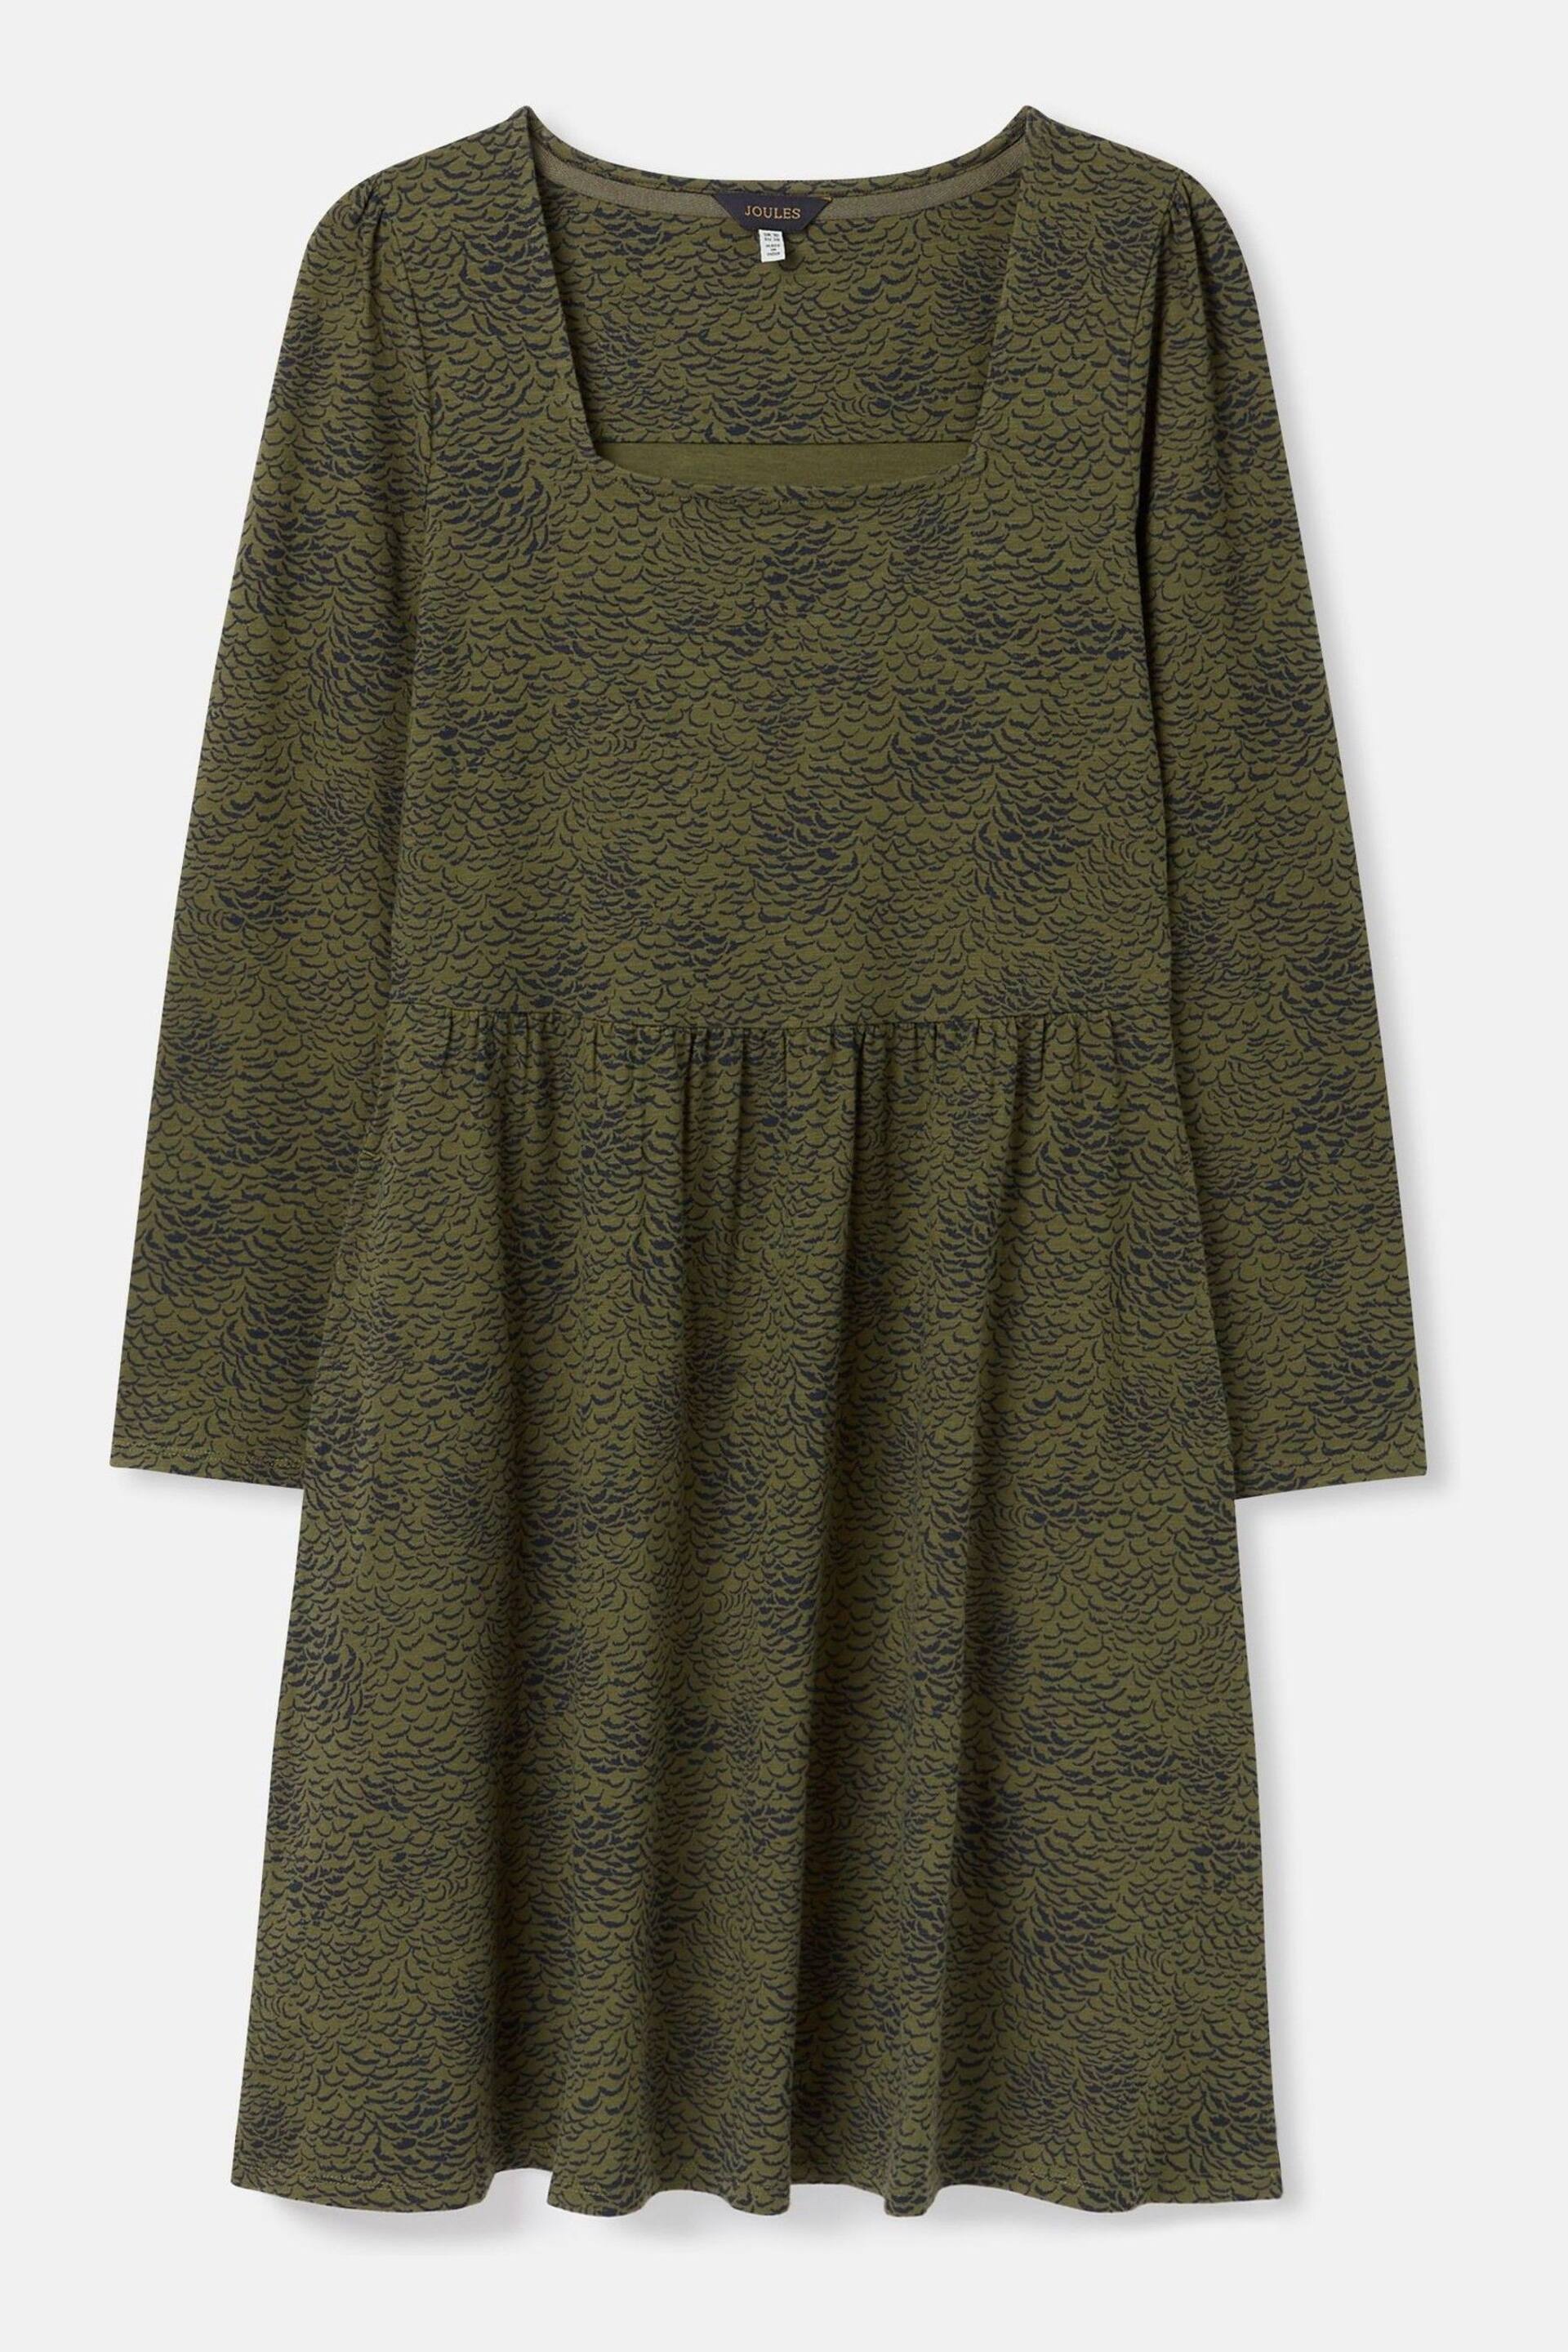 Joules Neve Green Long Sleeve Jersey Dress - Image 7 of 7